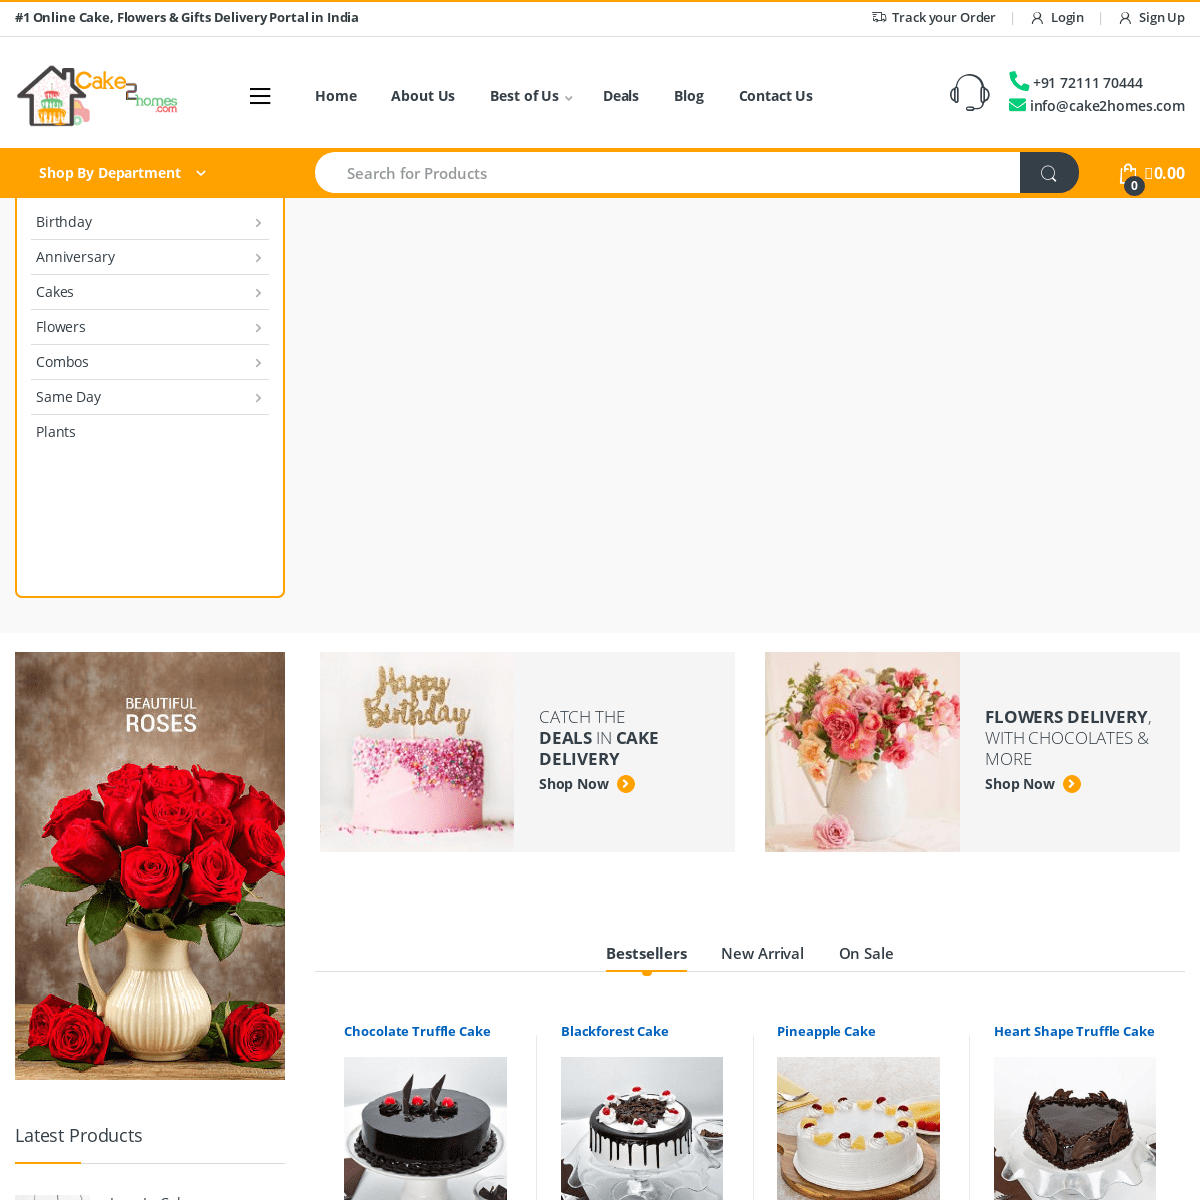 A complete backup of https://cake2homes.com